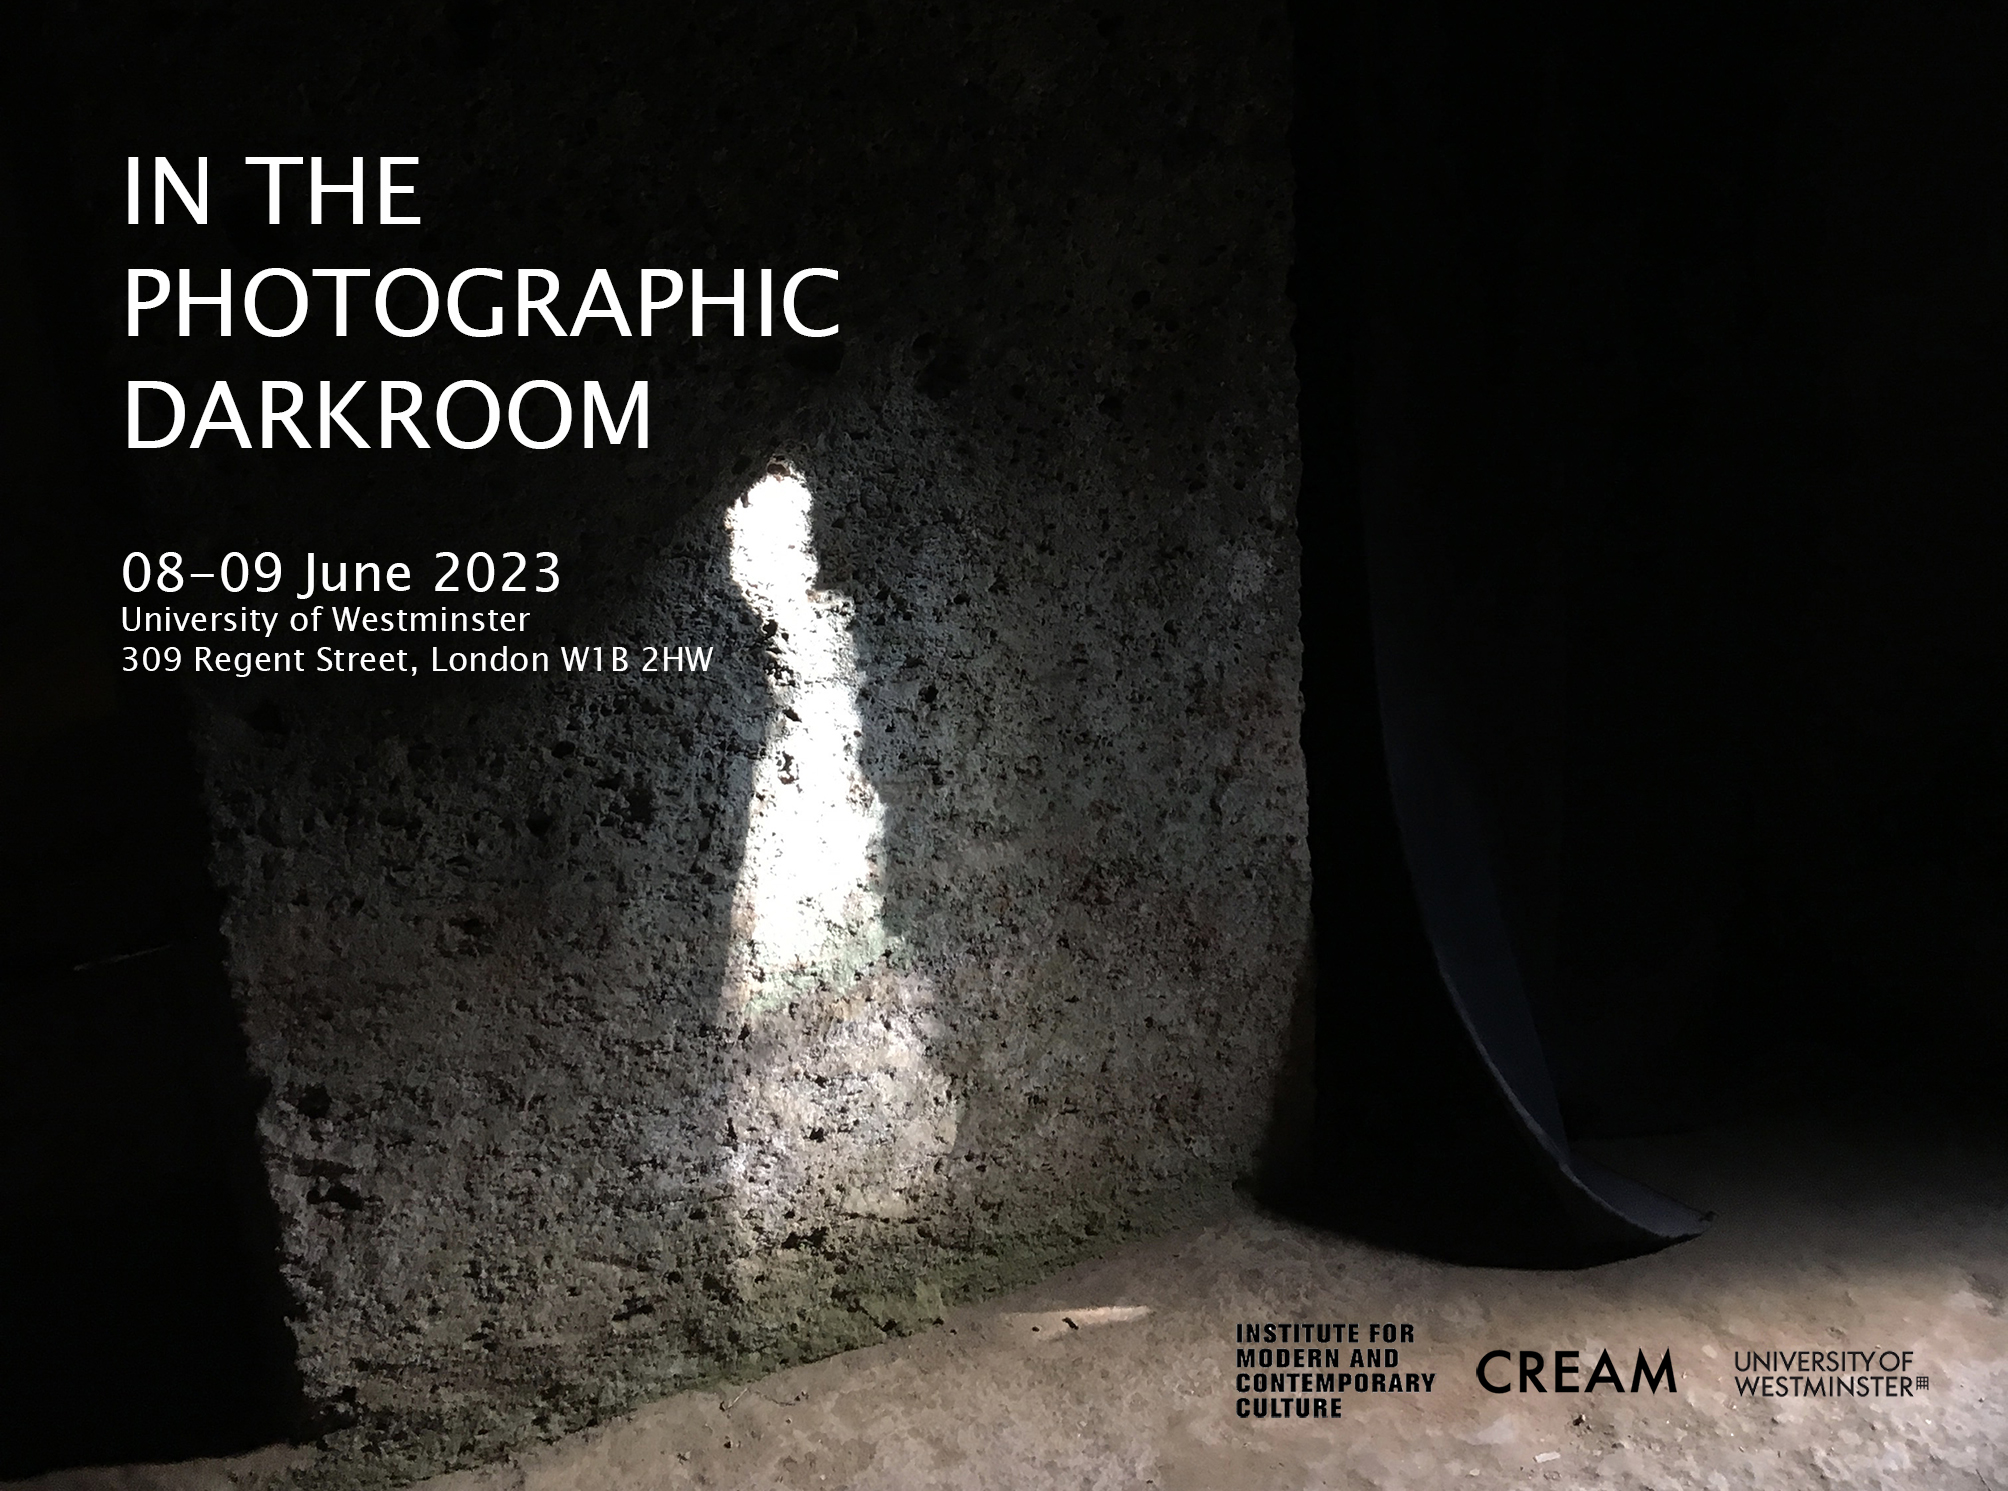 Poster for Darkroom conference on 8th to 9th June 2023 with logos